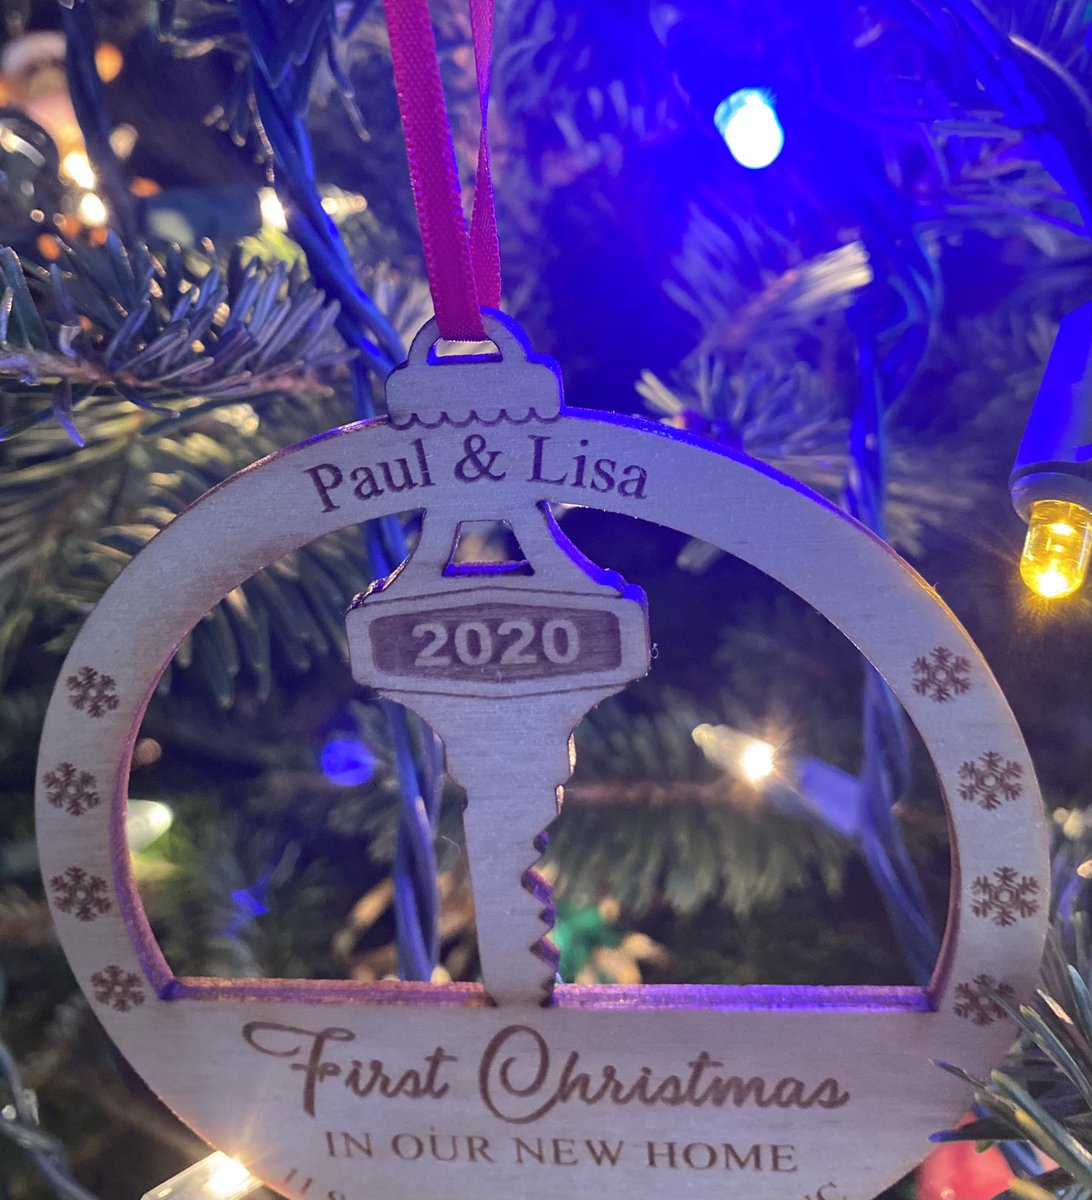 @johnpavlovitz With all of the terrible things this year brought us, my husband and I are feeling great about one good thing that happened. Something we thought would never happen. God had other plans! ✨#mychristmasornament